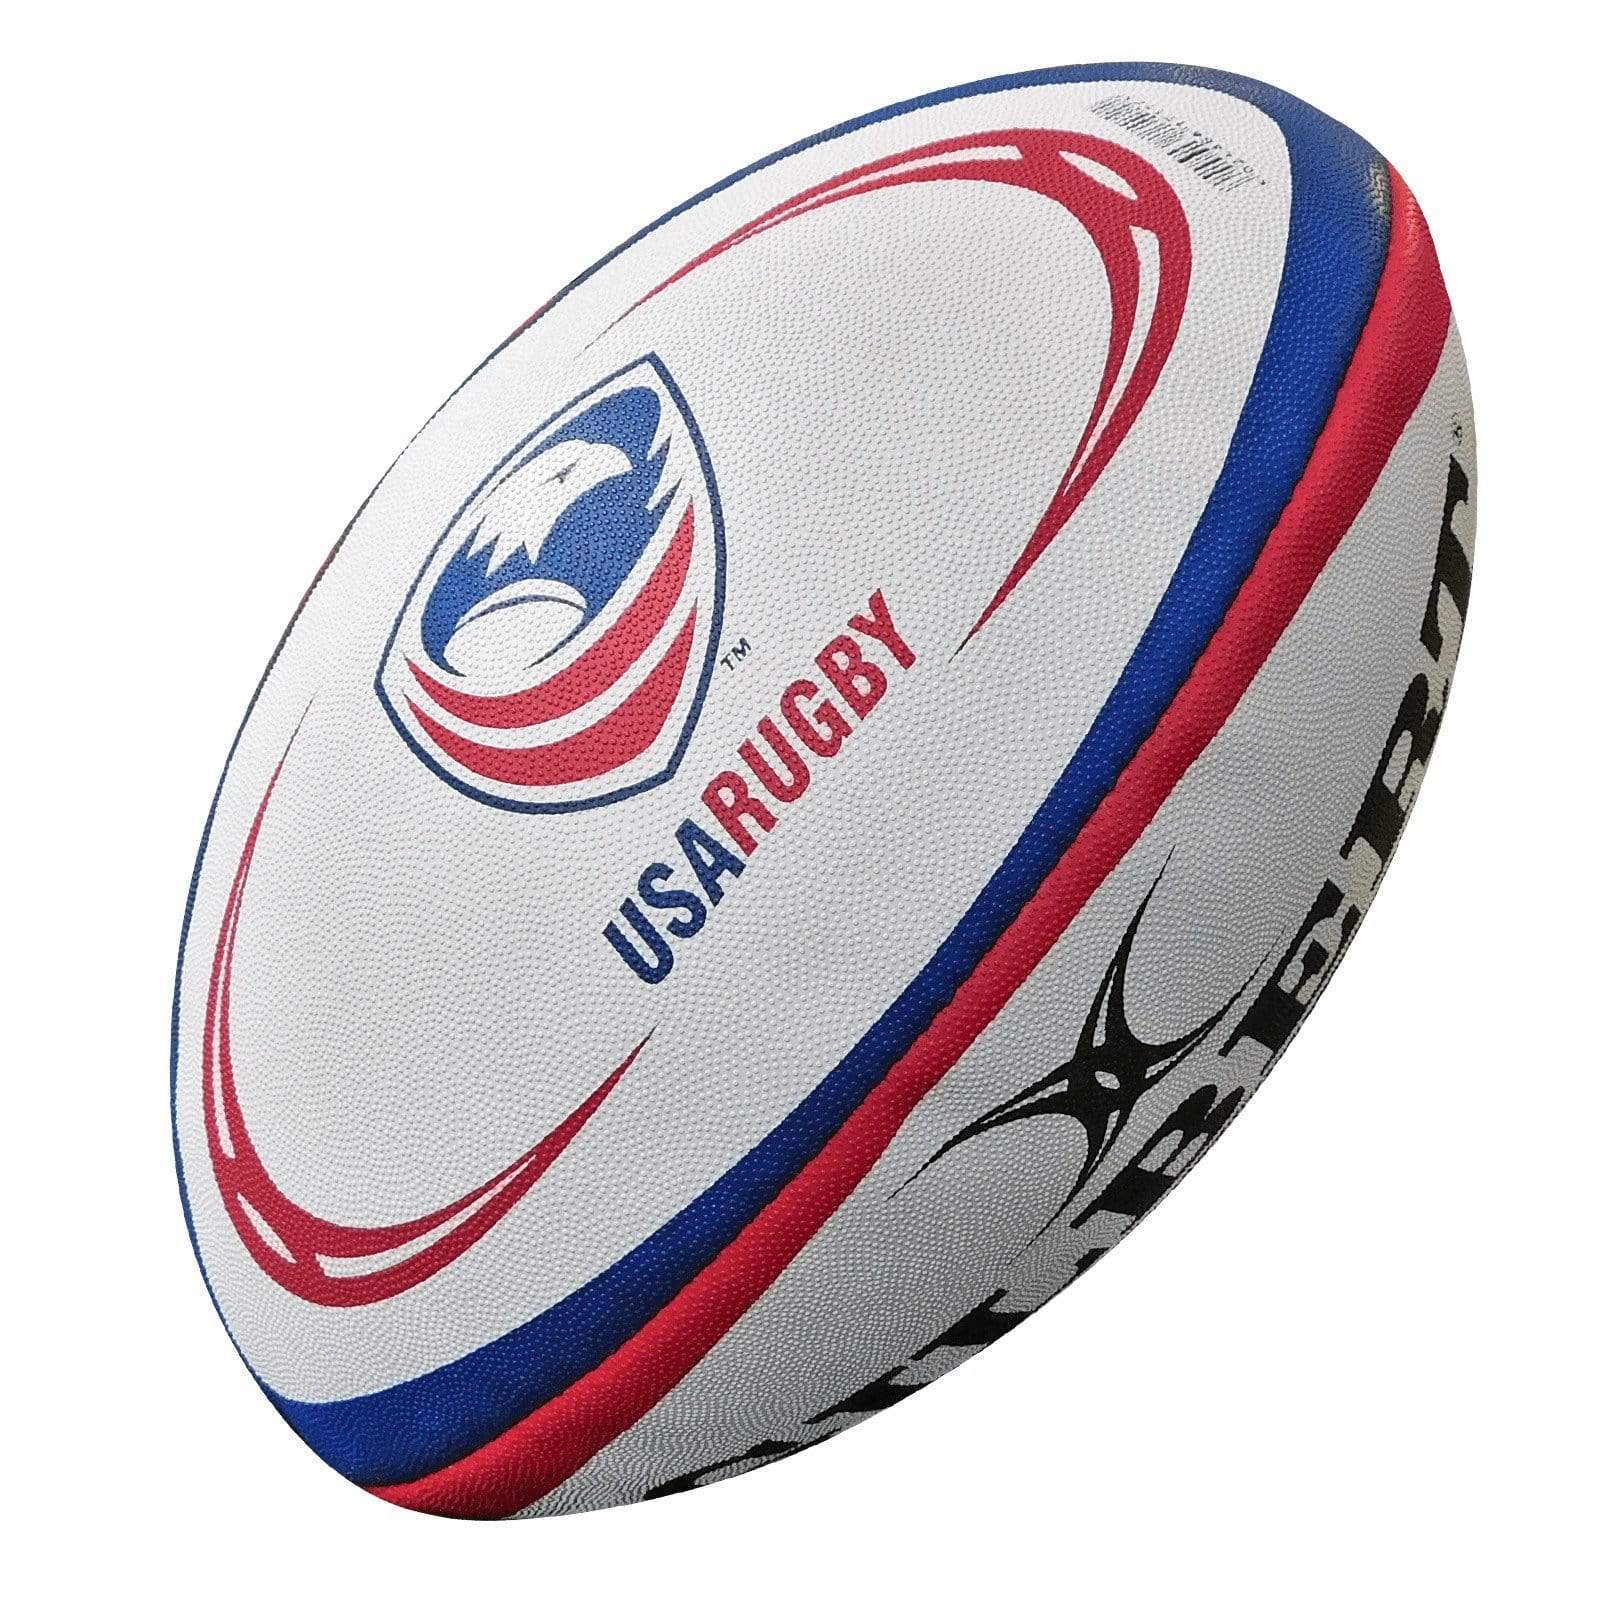 Rugby Imports Gilbert Barbarian USA Rugby Match Ball